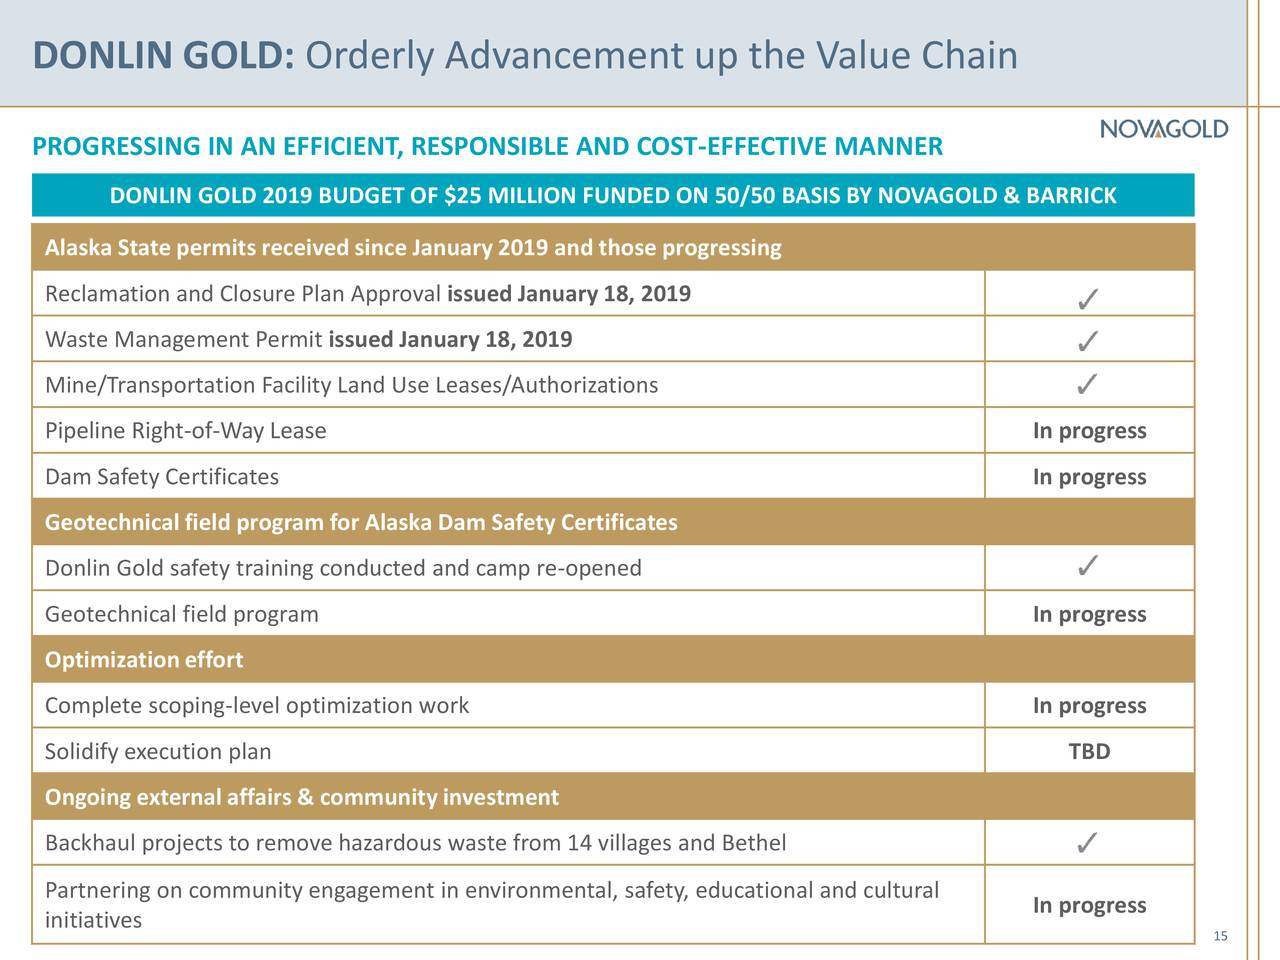 DONLIN GOLD: Orderly Advancement up the Value Chain